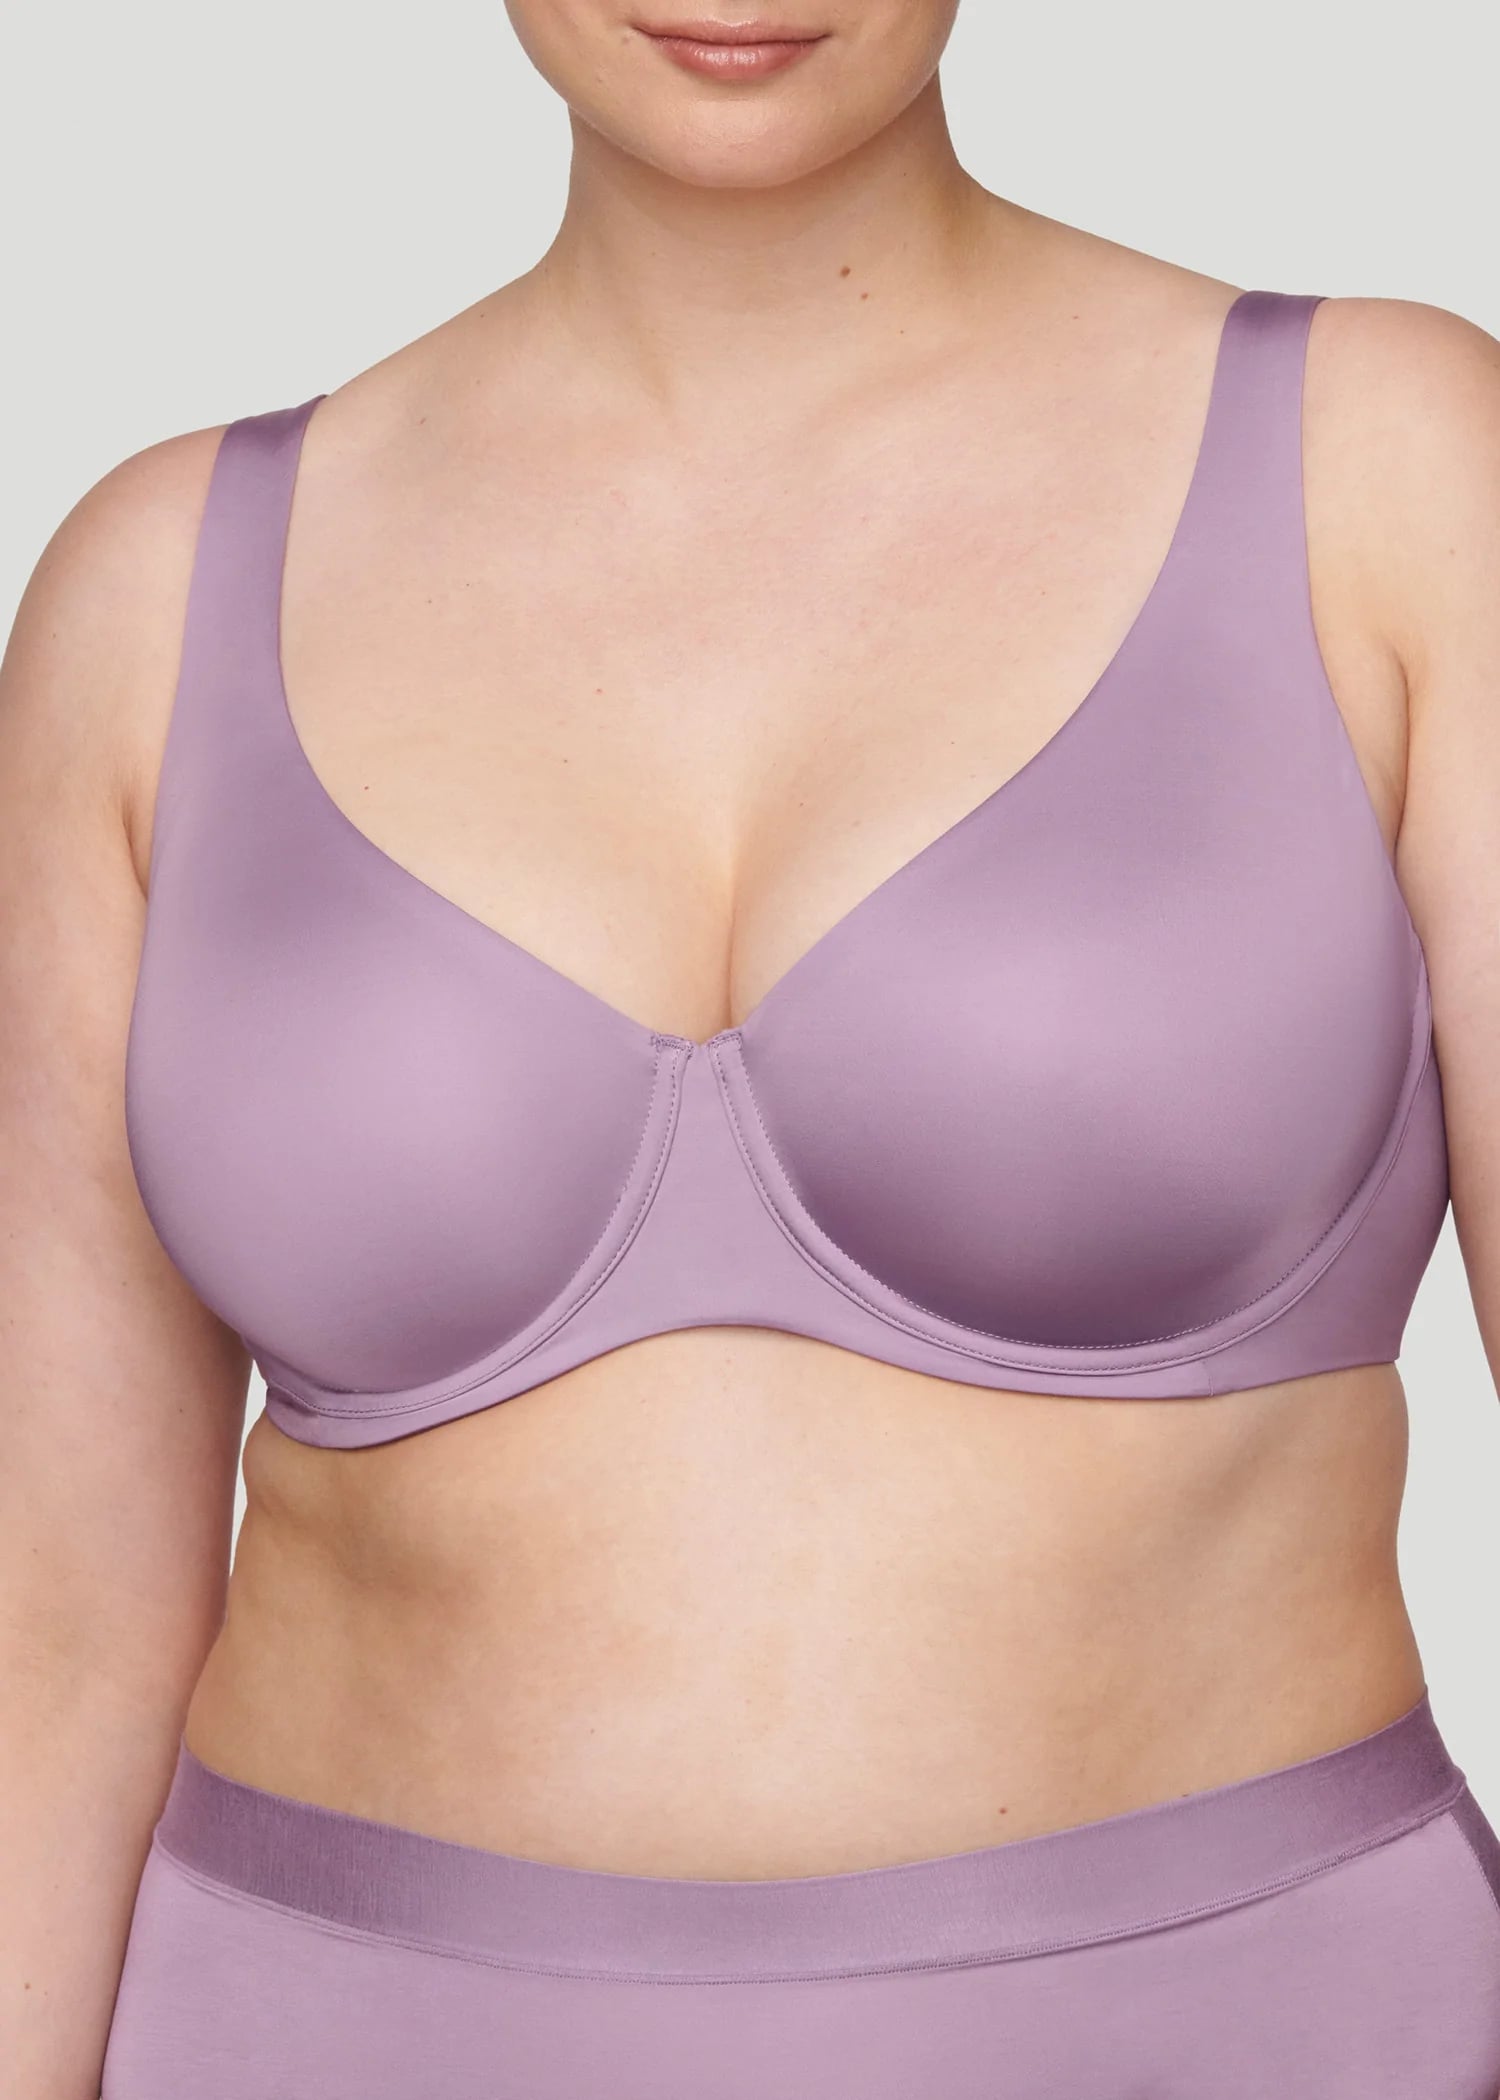 I tried CUUP's inclusive lingerie: Balconette Bra review